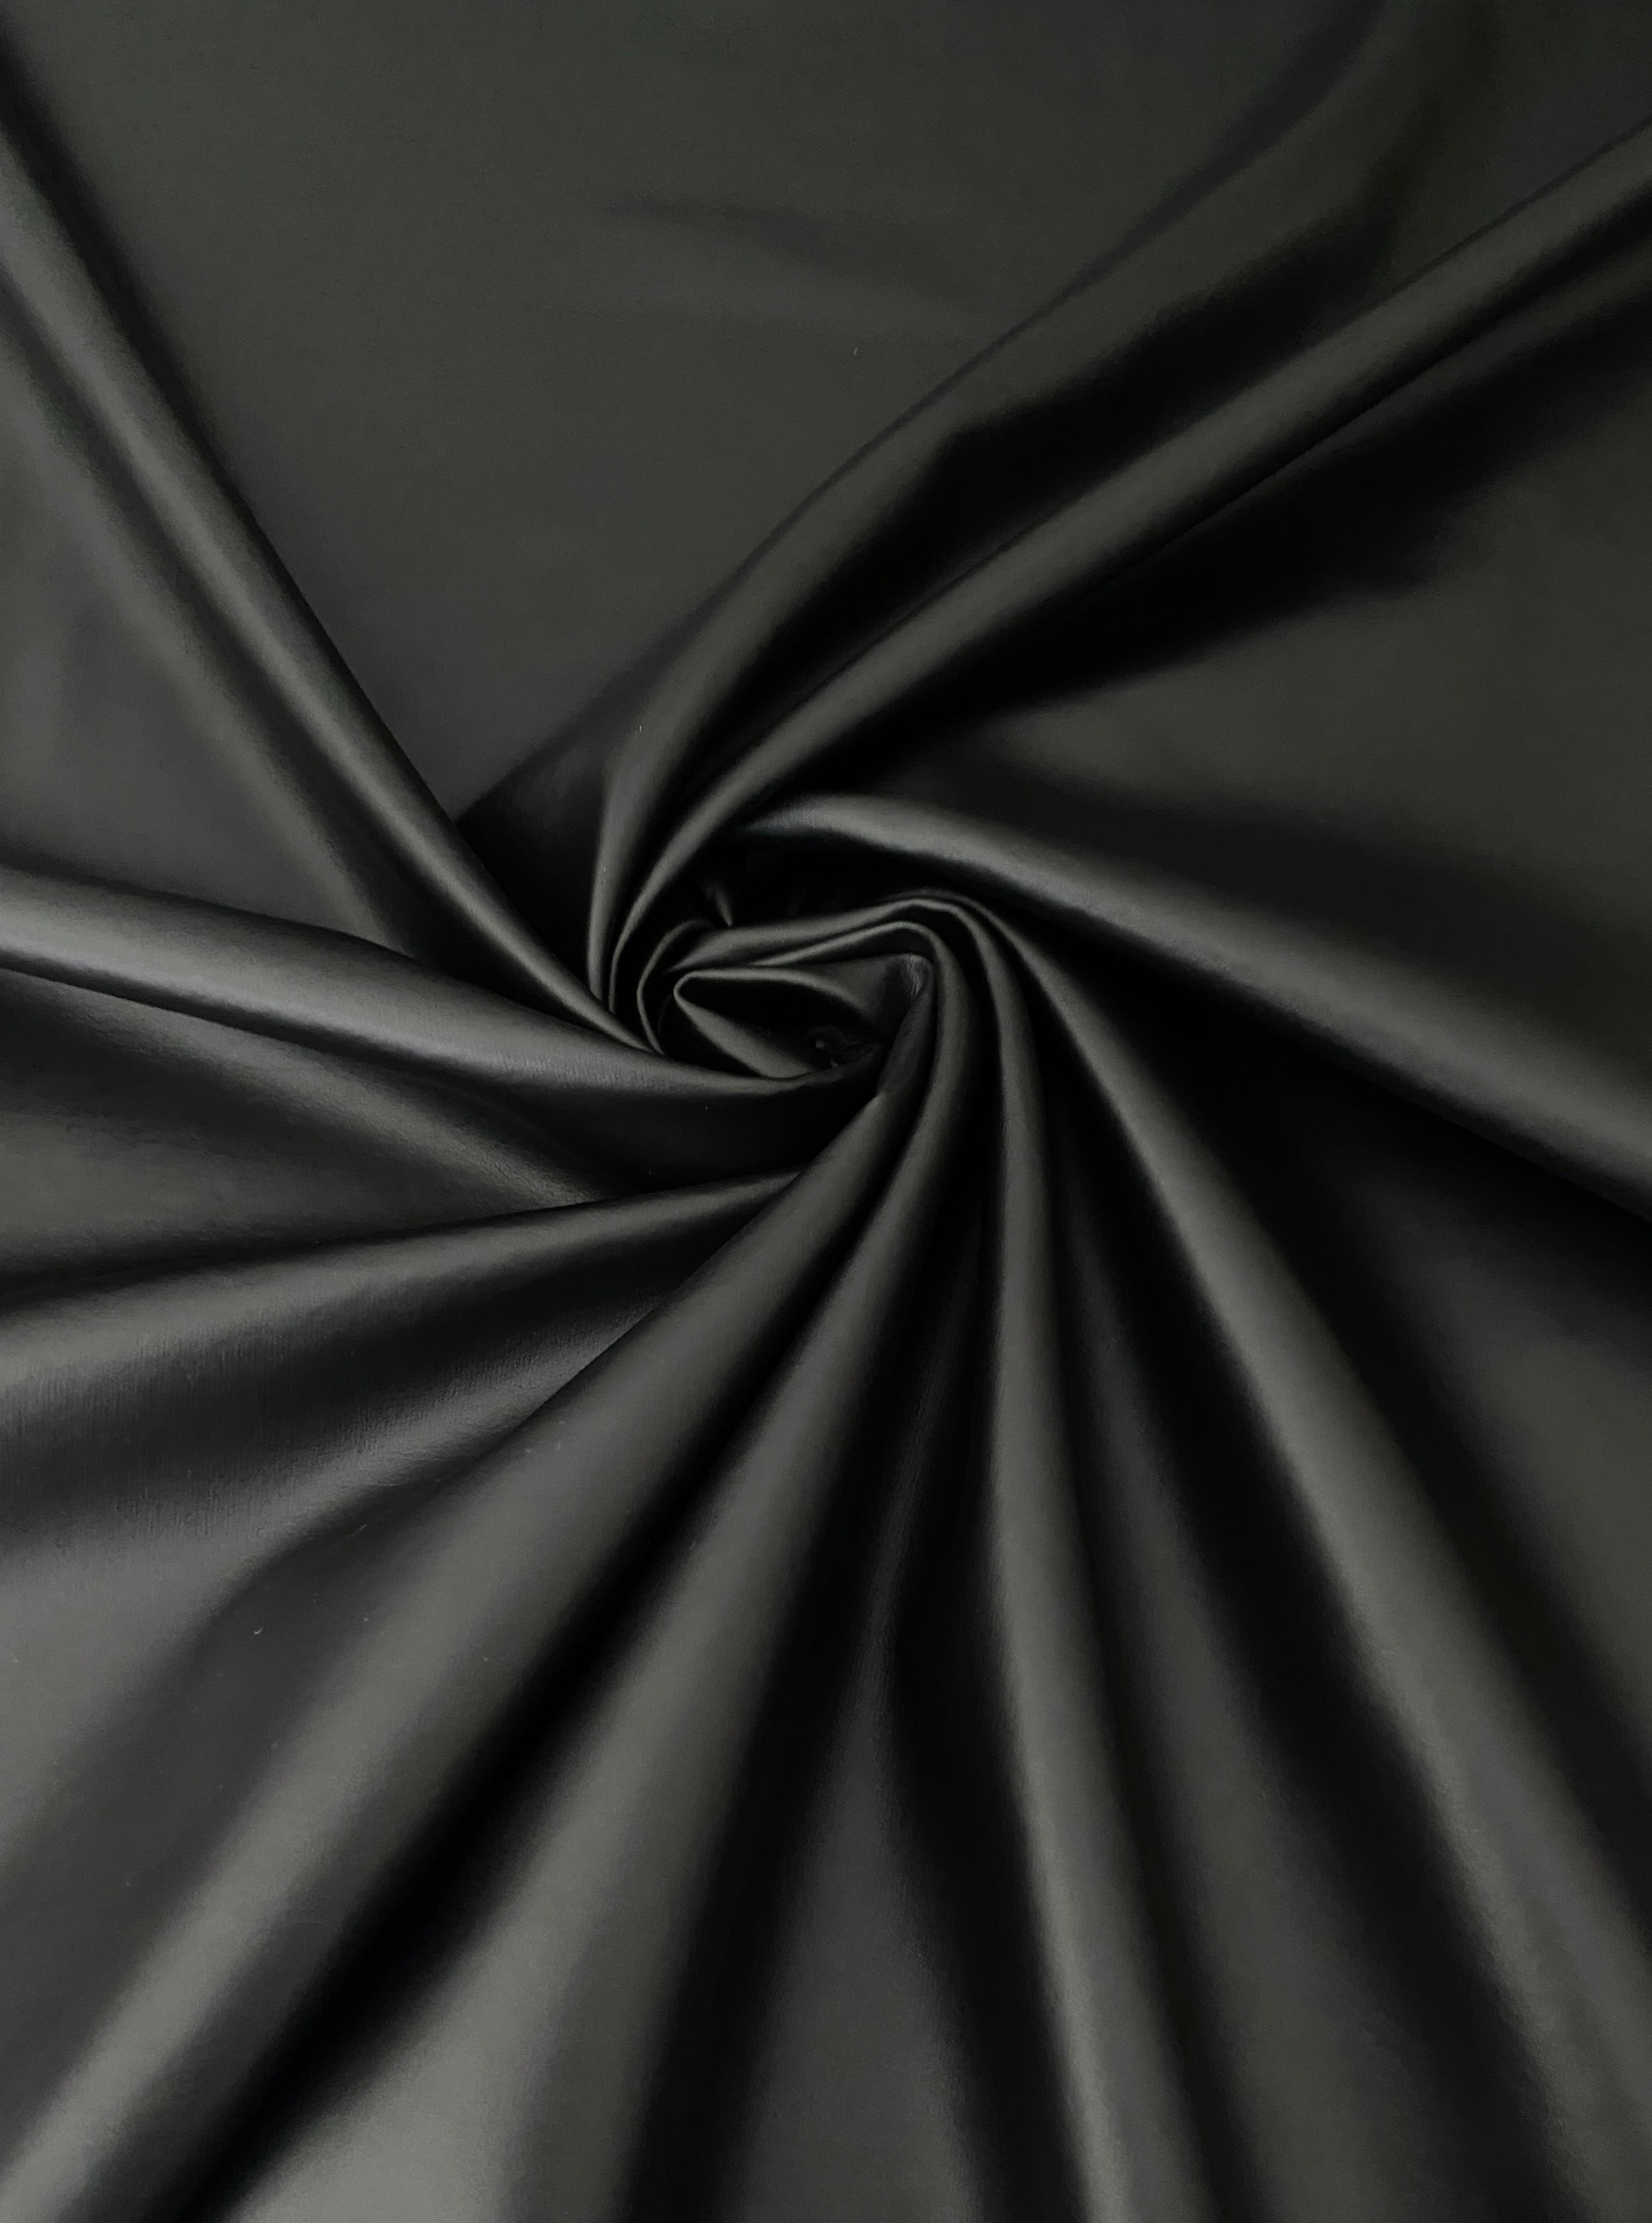 Vegan Leather Fabric for Upholstery Faux Leather Dark Olive 